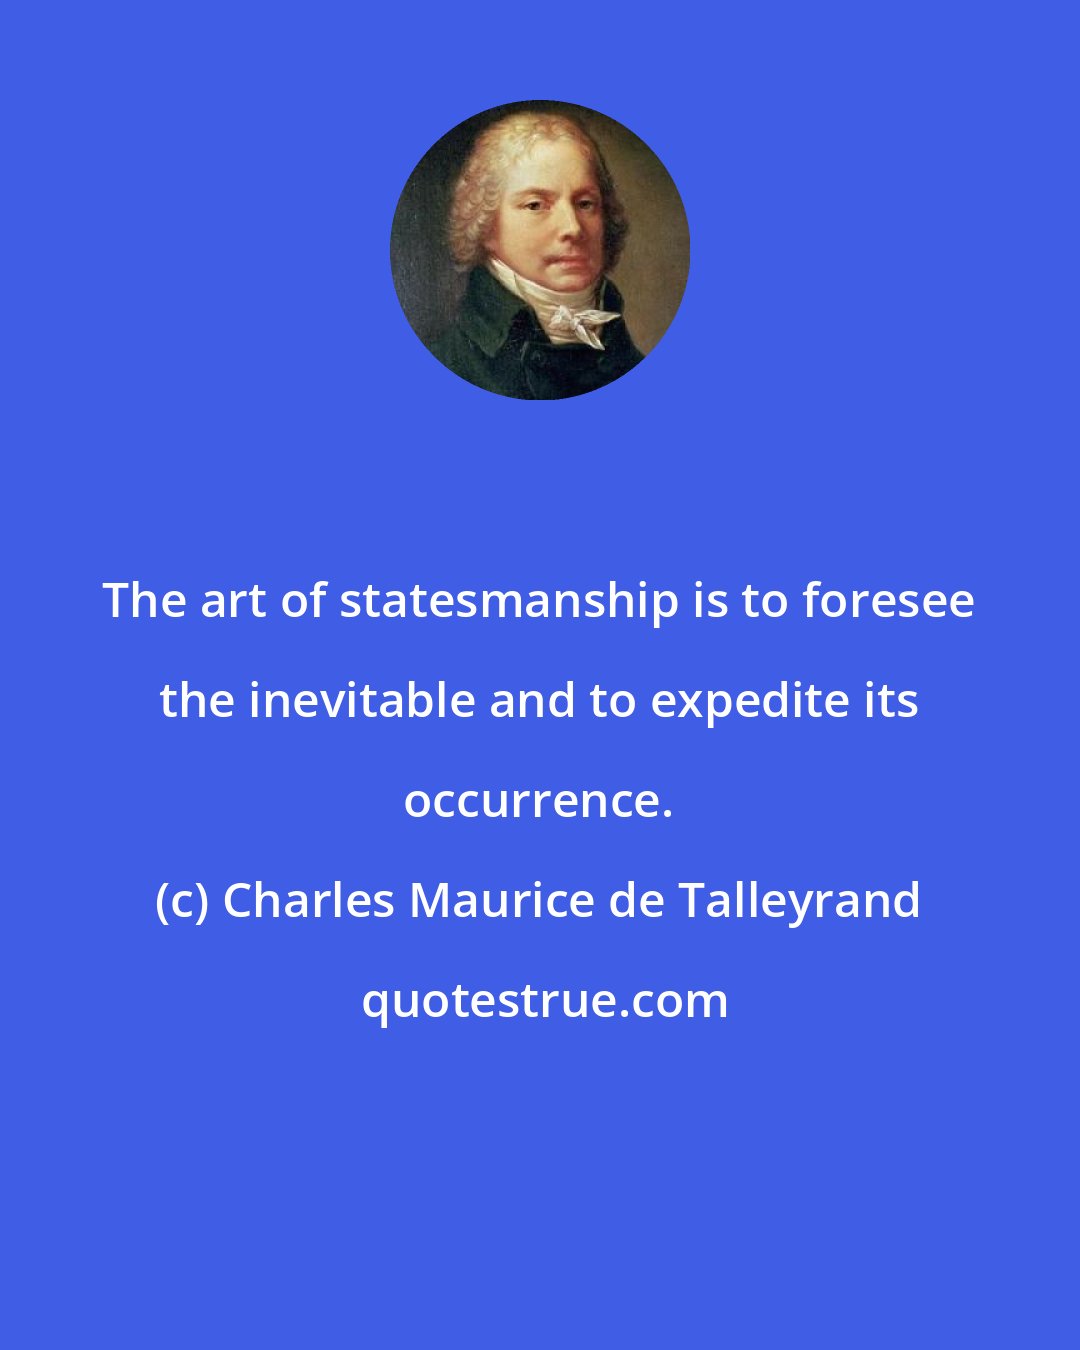 Charles Maurice de Talleyrand: The art of statesmanship is to foresee the inevitable and to expedite its occurrence.